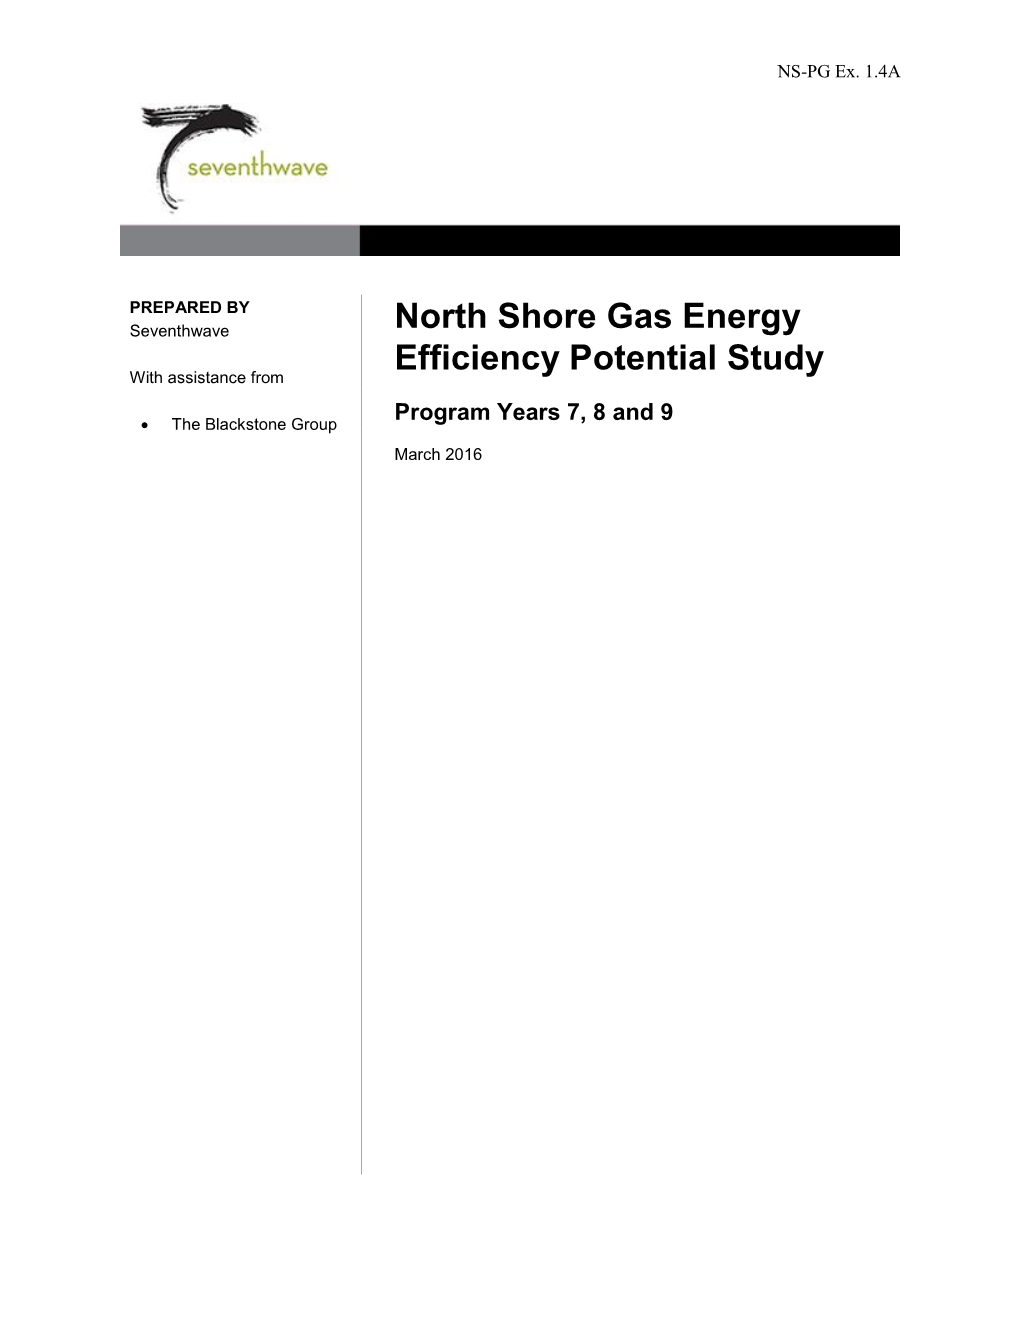 North Shore Gas Energy Efficiency Potential Study with Assistance from Program Years 7, 8 and 9  the Blackstone Group March 2016